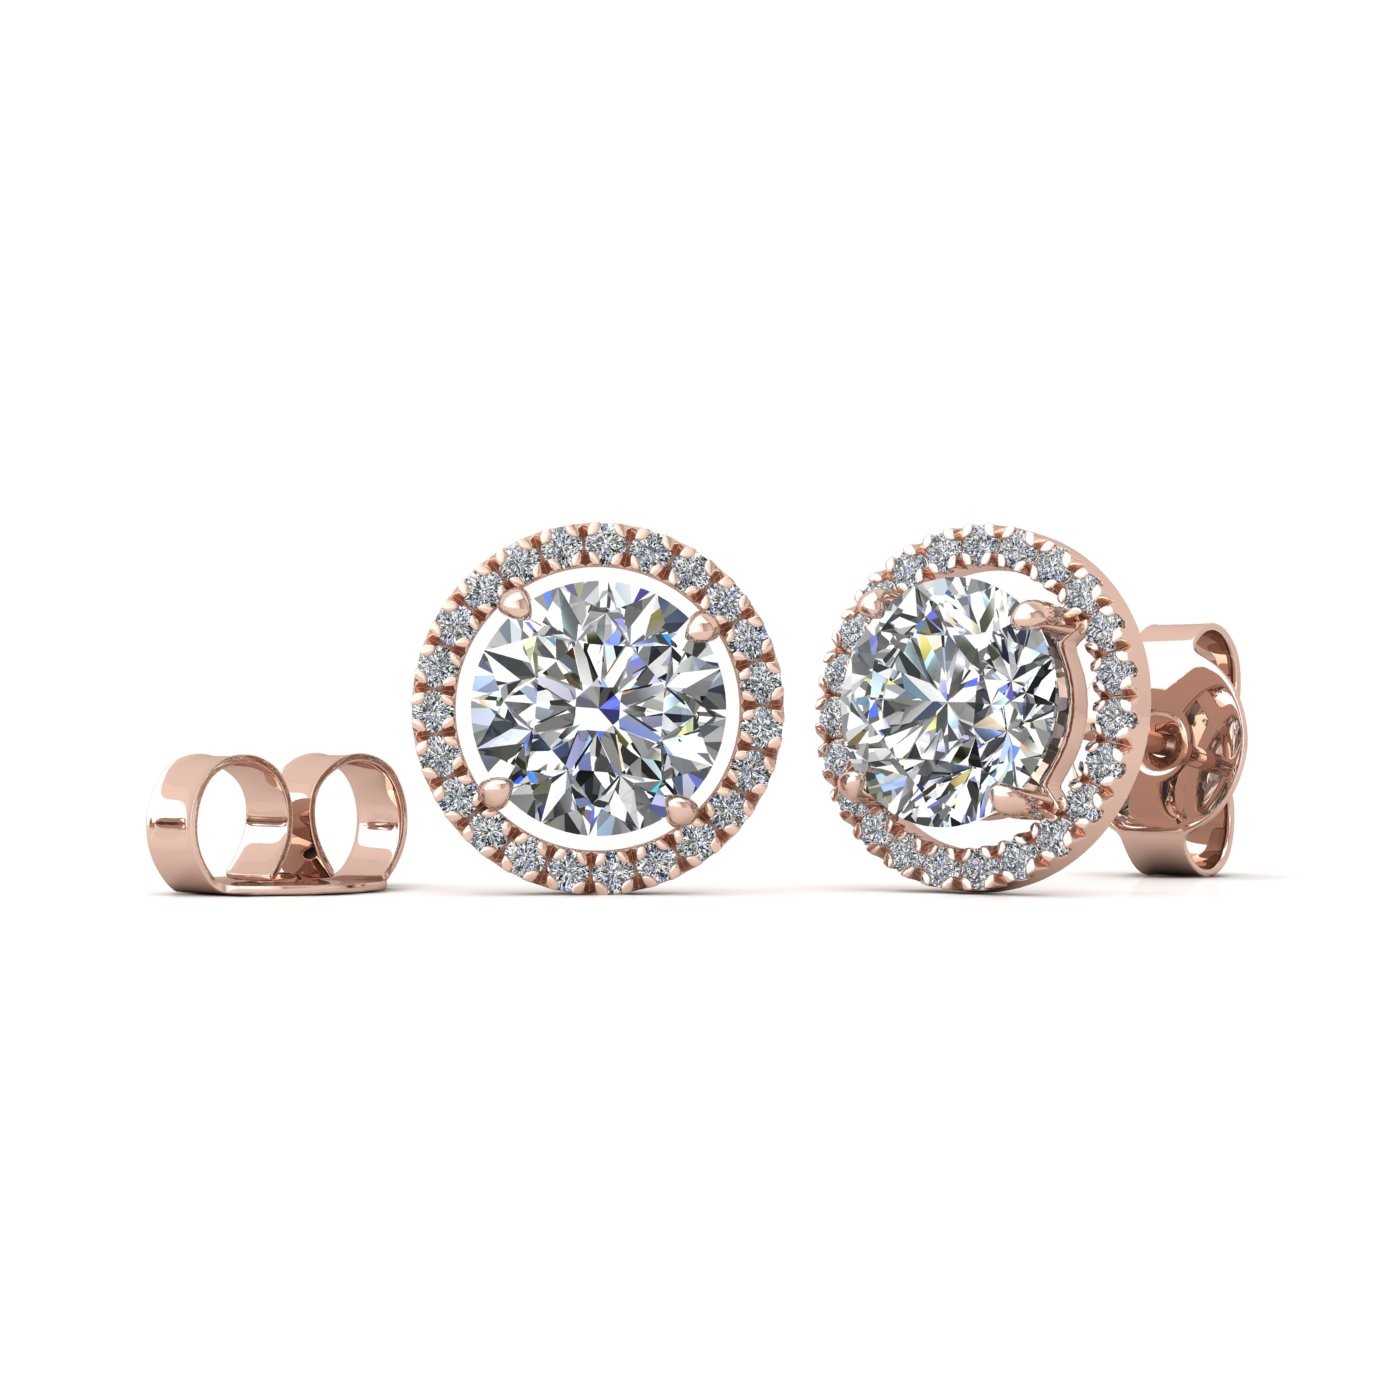 18k rose gold  0,3 ct each (0,6 tcw) 4 prongs round brilliant cut halo diamond earring studs Photos & images